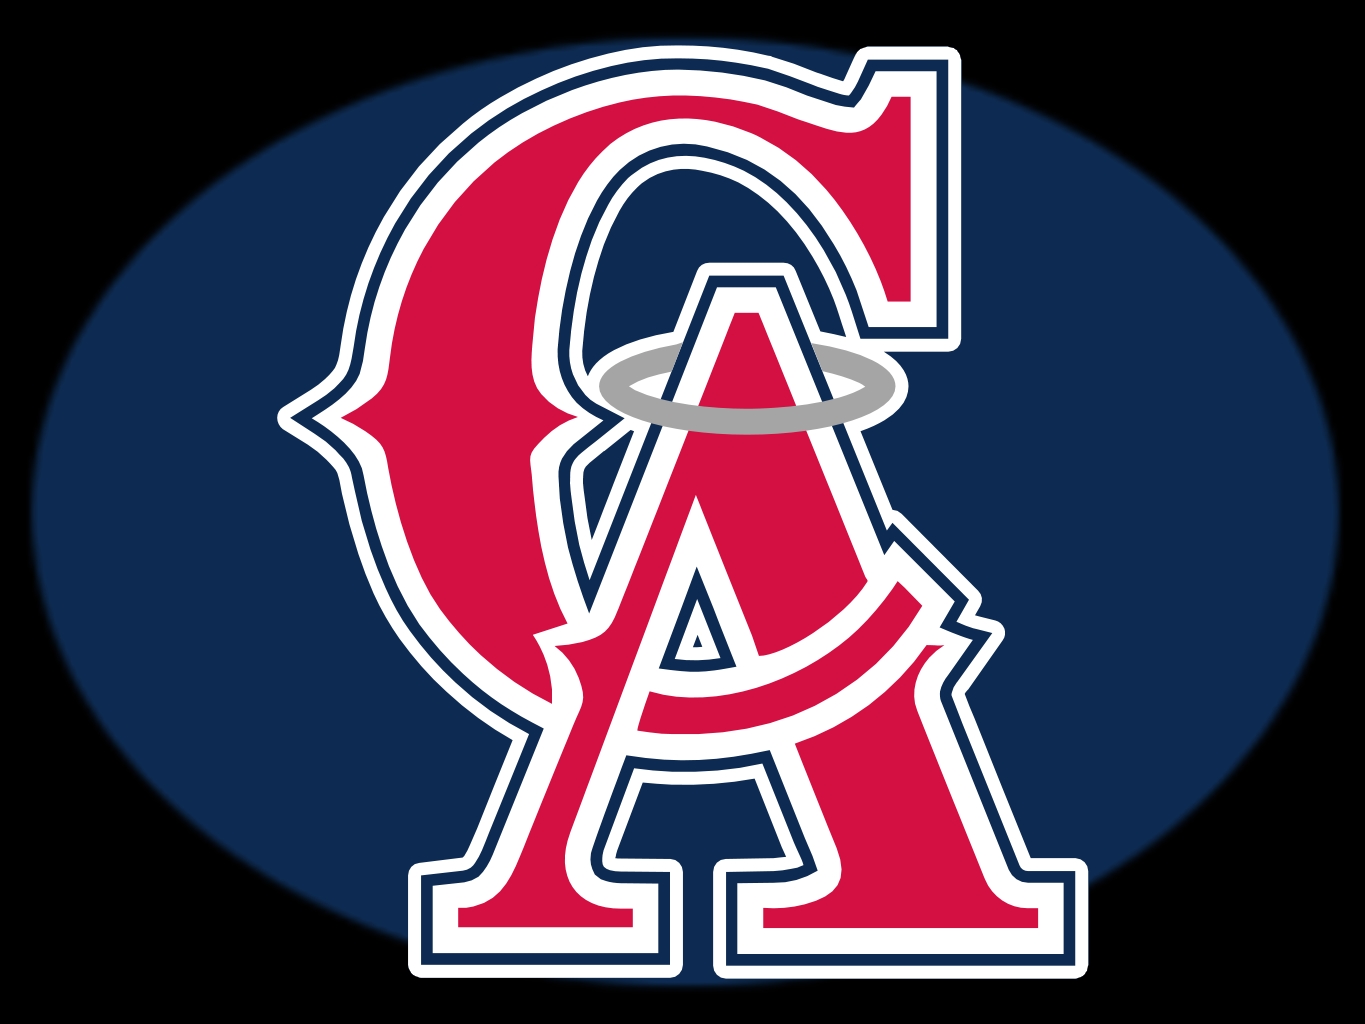 Related Pictures la angels of anaheim baseball iphone wallpaper